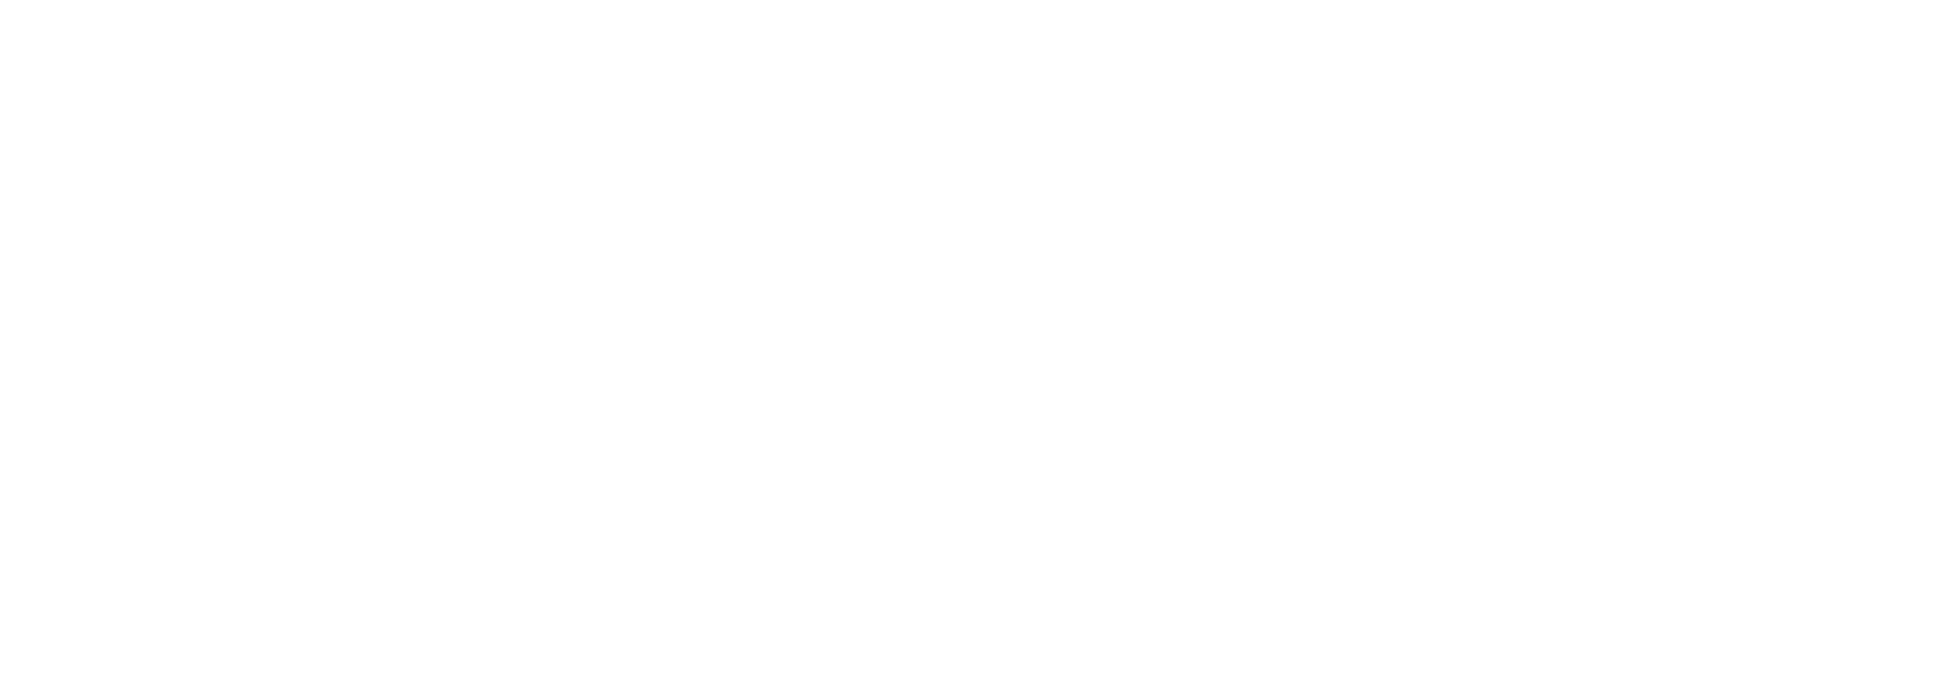 NWFSC MLT Program Announces 100% Pass Rate - Northwest Florida State